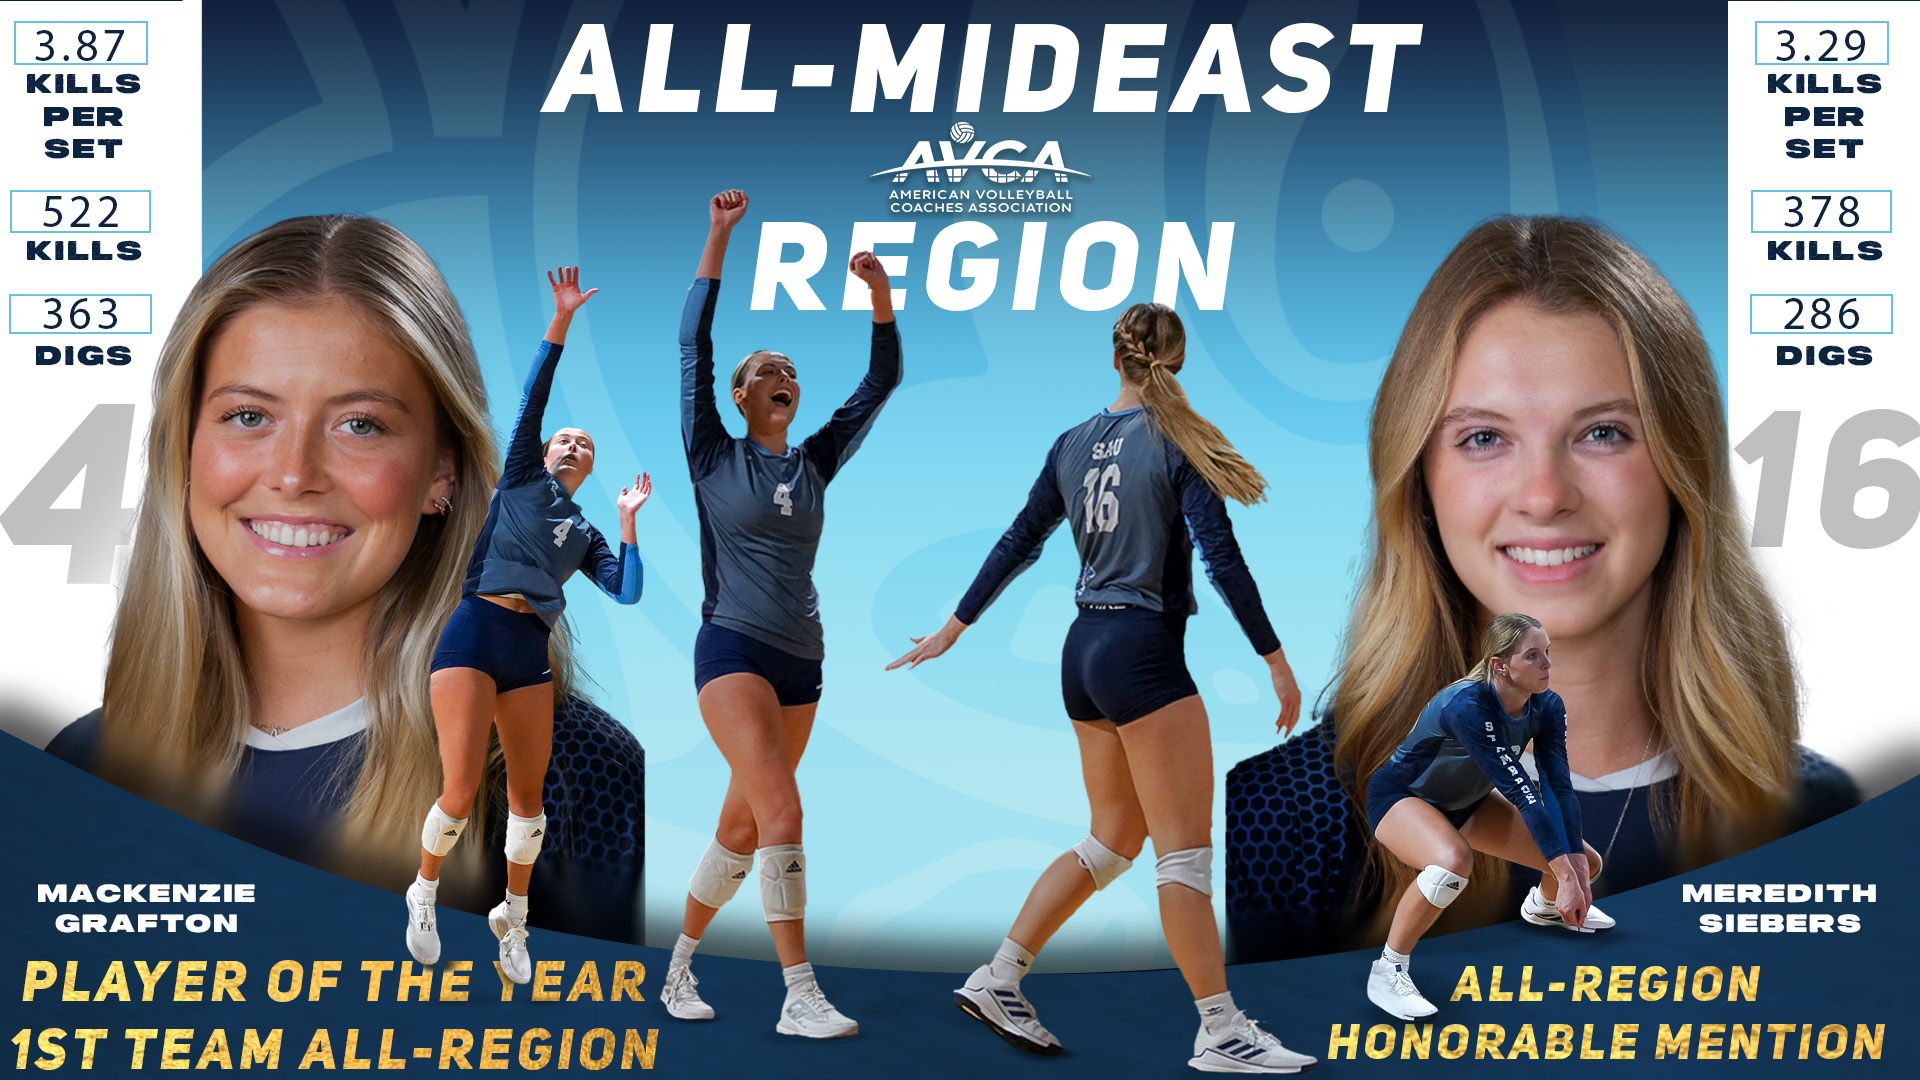 Grafton named AVCA Region Player of the Year, Siebers earns all-region honorable mention